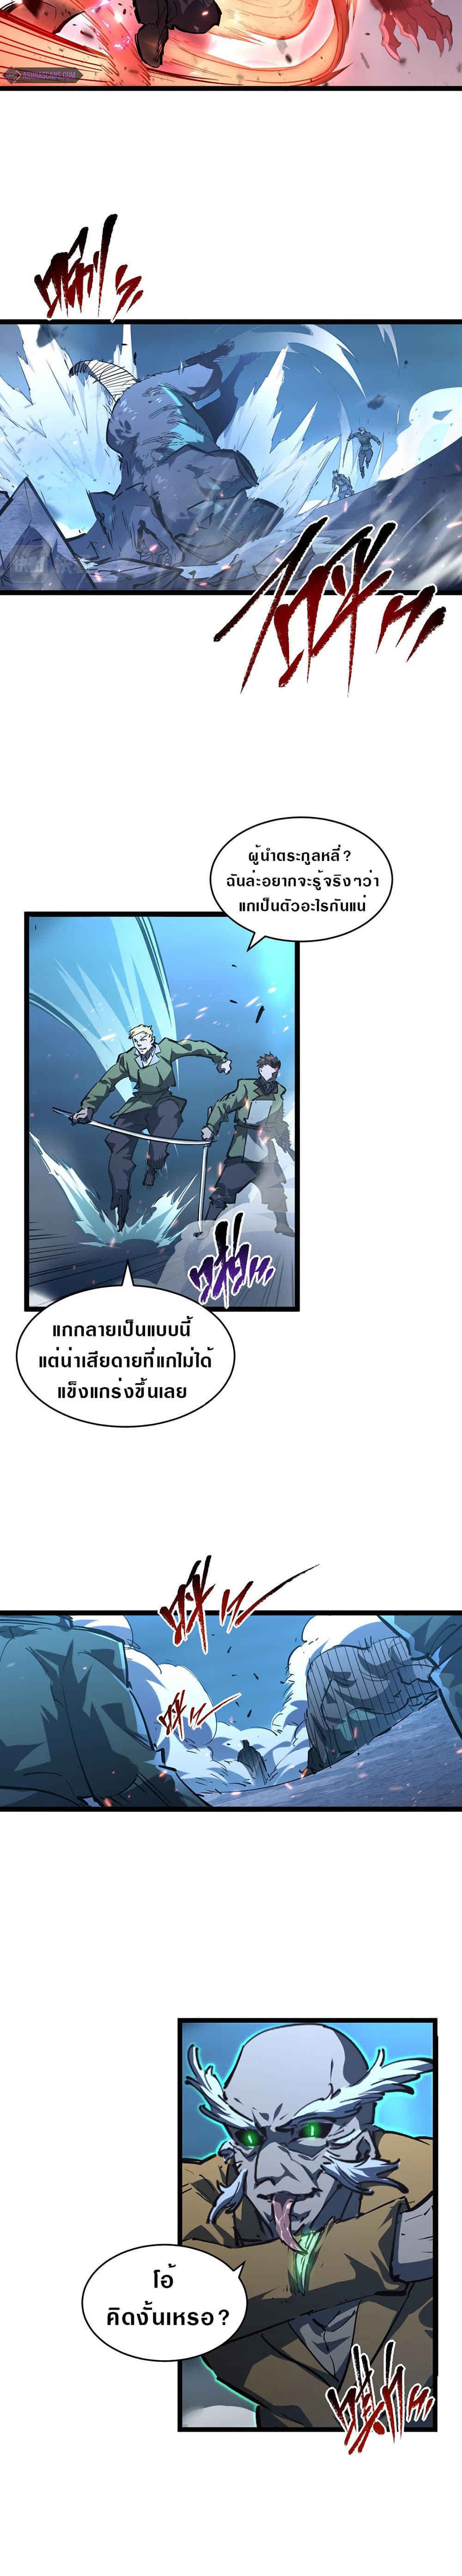 Rise From The Rubble เศษซากวันสิ้นโลก 69-69